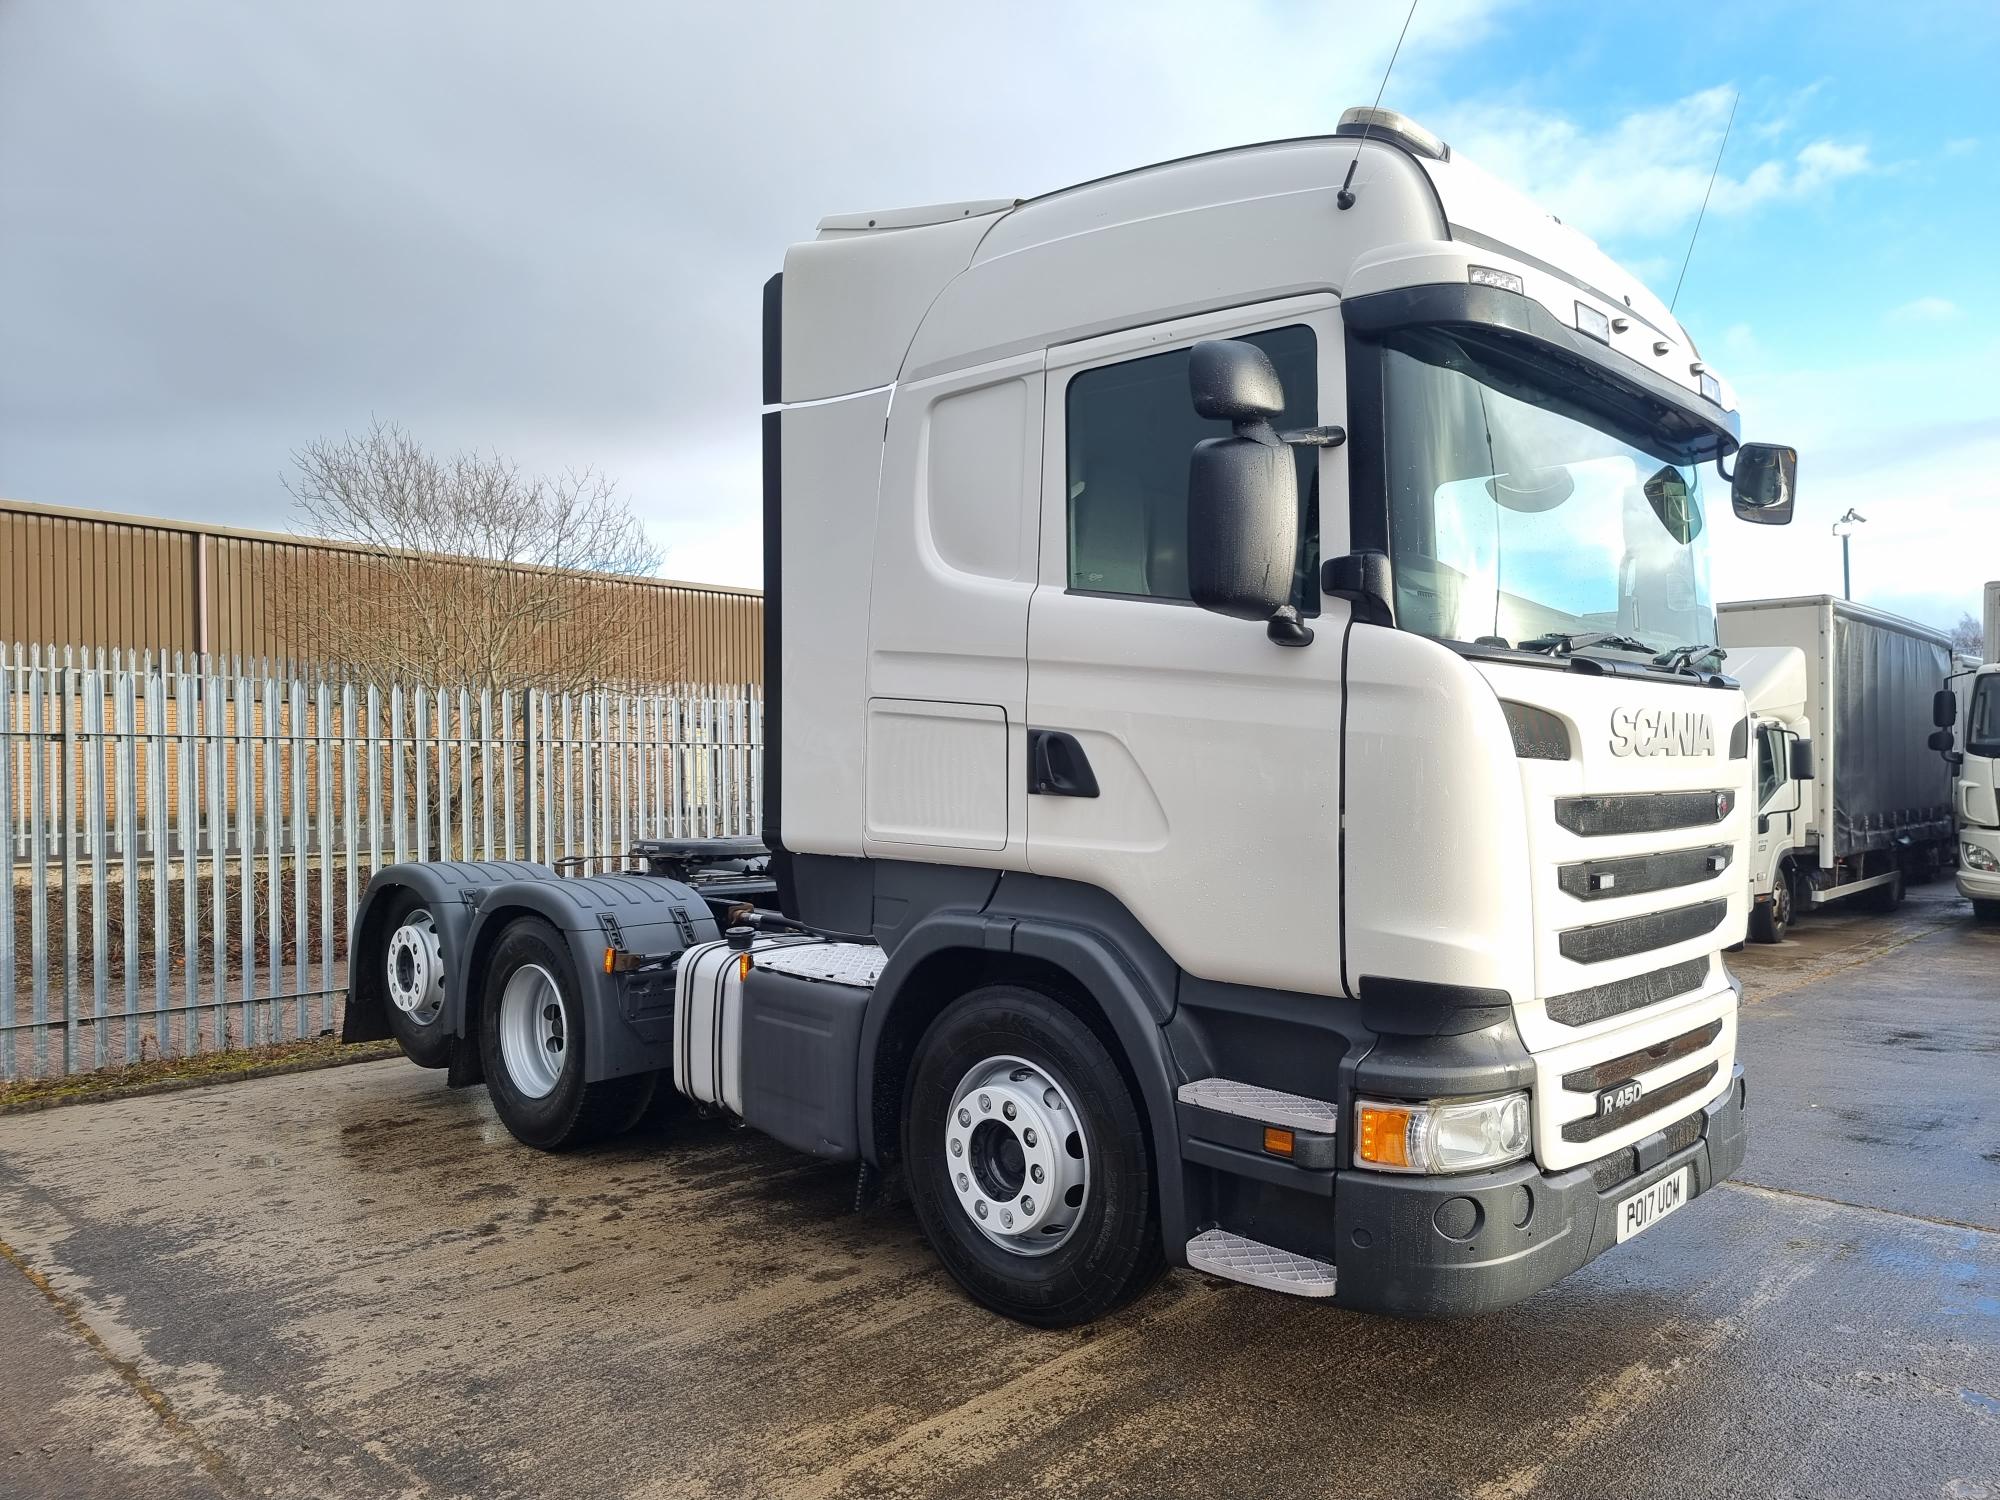 2017 Scania R Series, Euro 6, 450bhp, Highline Double Sleeper Cab, Opticruise Gearbox, FORs Camera System, Rear Lift Axle (TAG), Fridge, Cruise Control, Air Con, Steering Wheel Controls, Low Mileage, Warranty Available.